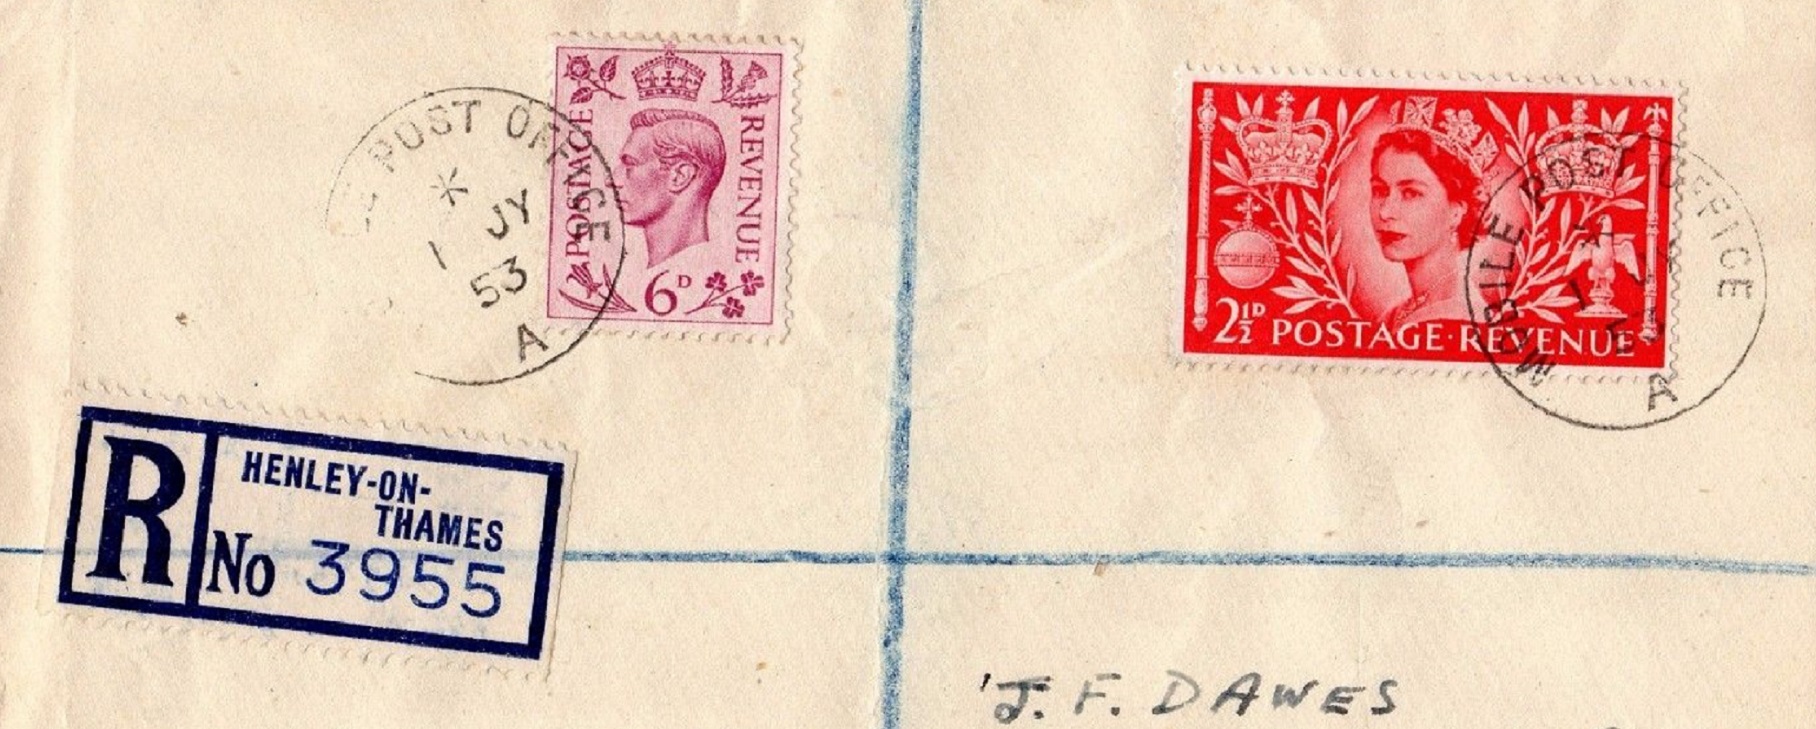 PM GBR 1953 July 1st Henley Mobile Post Office A 2